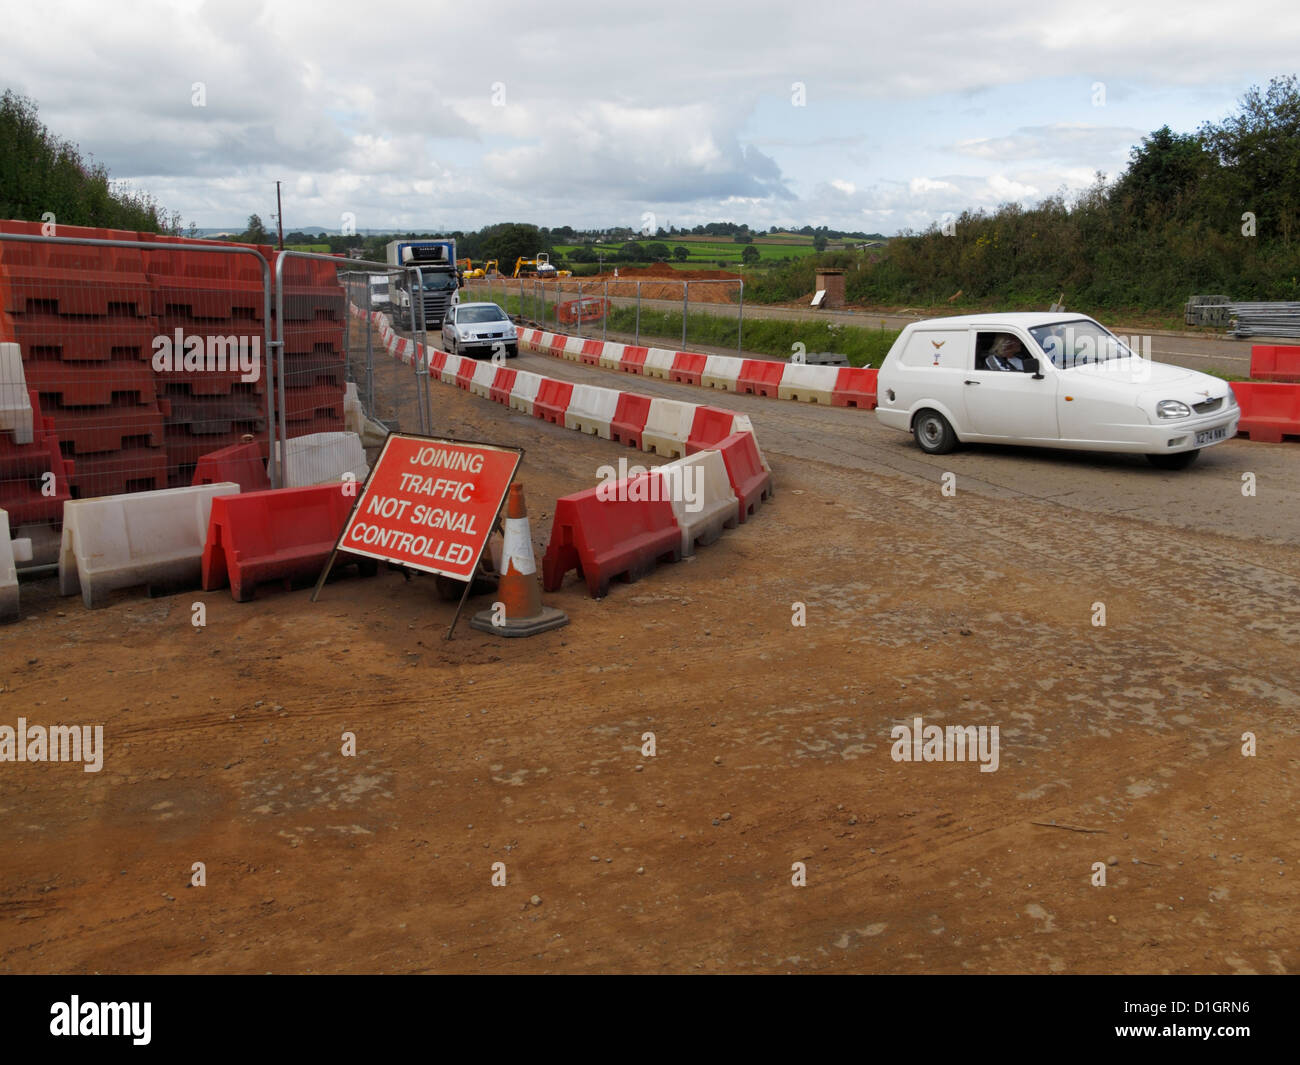 Water filled barriers marking temporary diversion through roadworks uk Reliant robin rialto threewheeler a forest of cones van Stock Photo